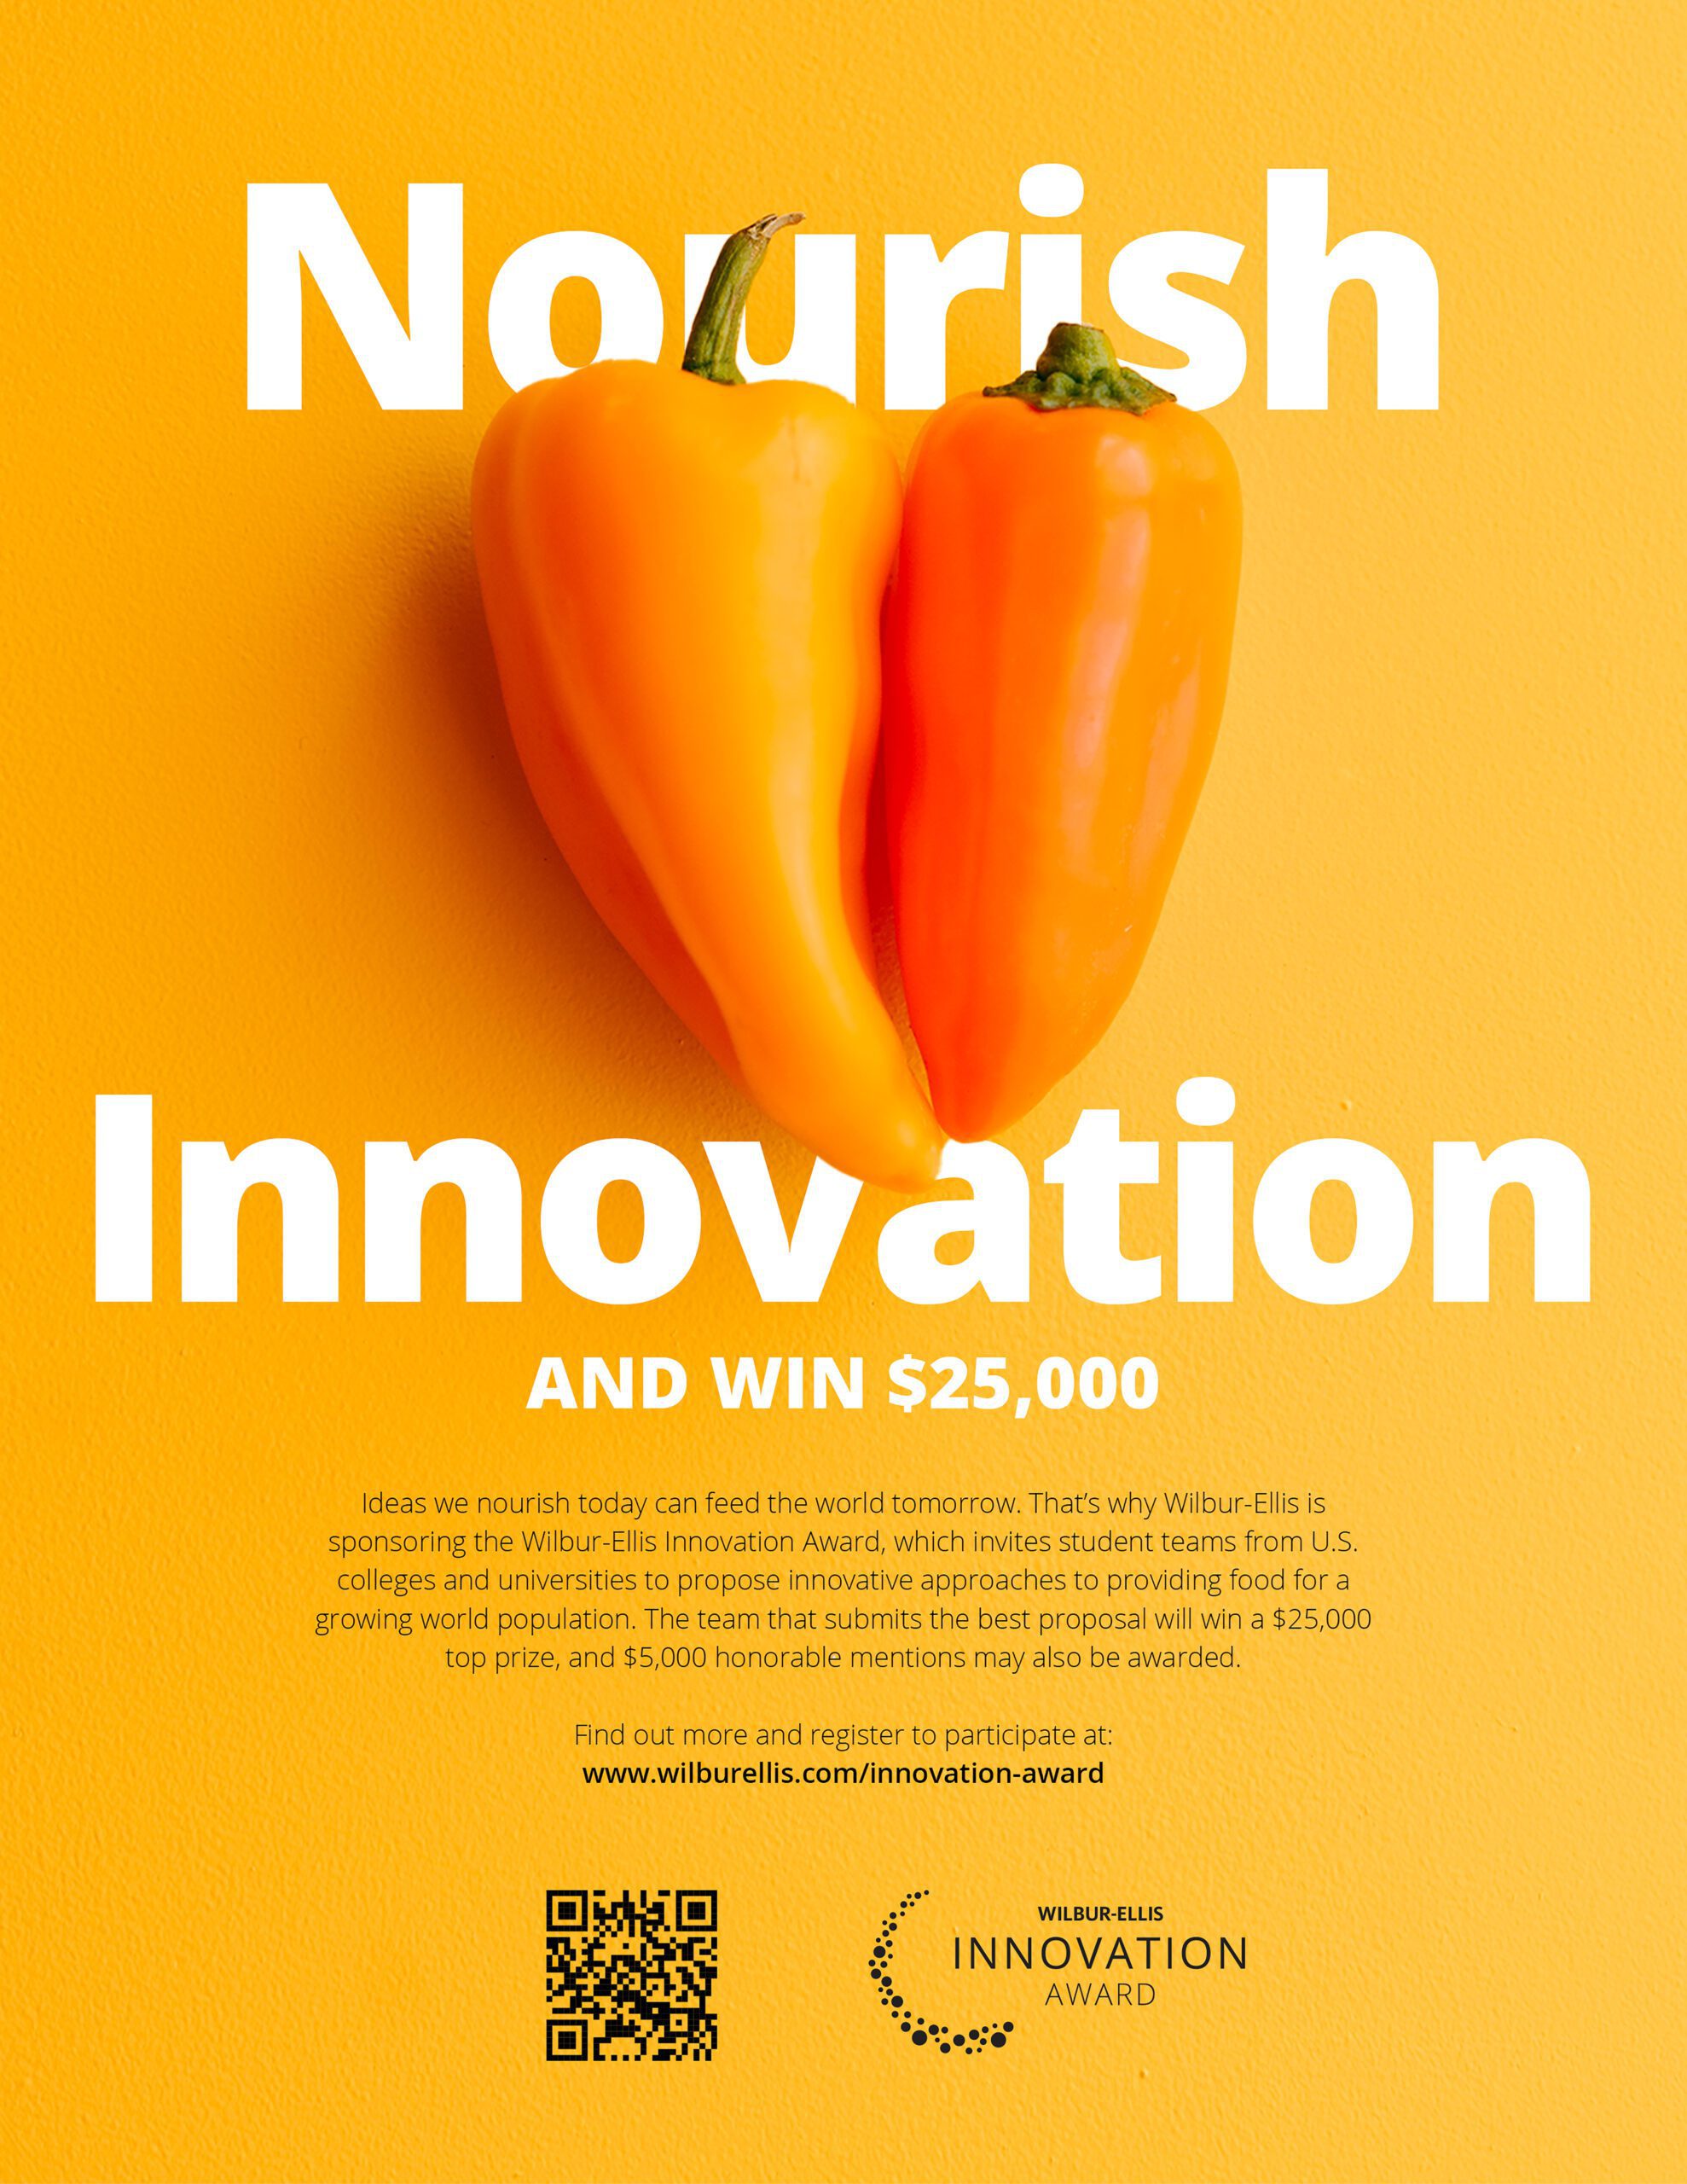 Nourish Innovation and win $25,000. Ideas we nourish today can feed the world tomorrow. That’s why Wilbur-Ellis is sponsoring the Wilbur-Ellis Innovation Award, which invites student teams from U.S. colleges and universities to propose innovative approaches to providing food for a growing world population. The team that submits the best proposal will win a $25,000 top prize, and $5,000 honorable mentions may also be awarded.